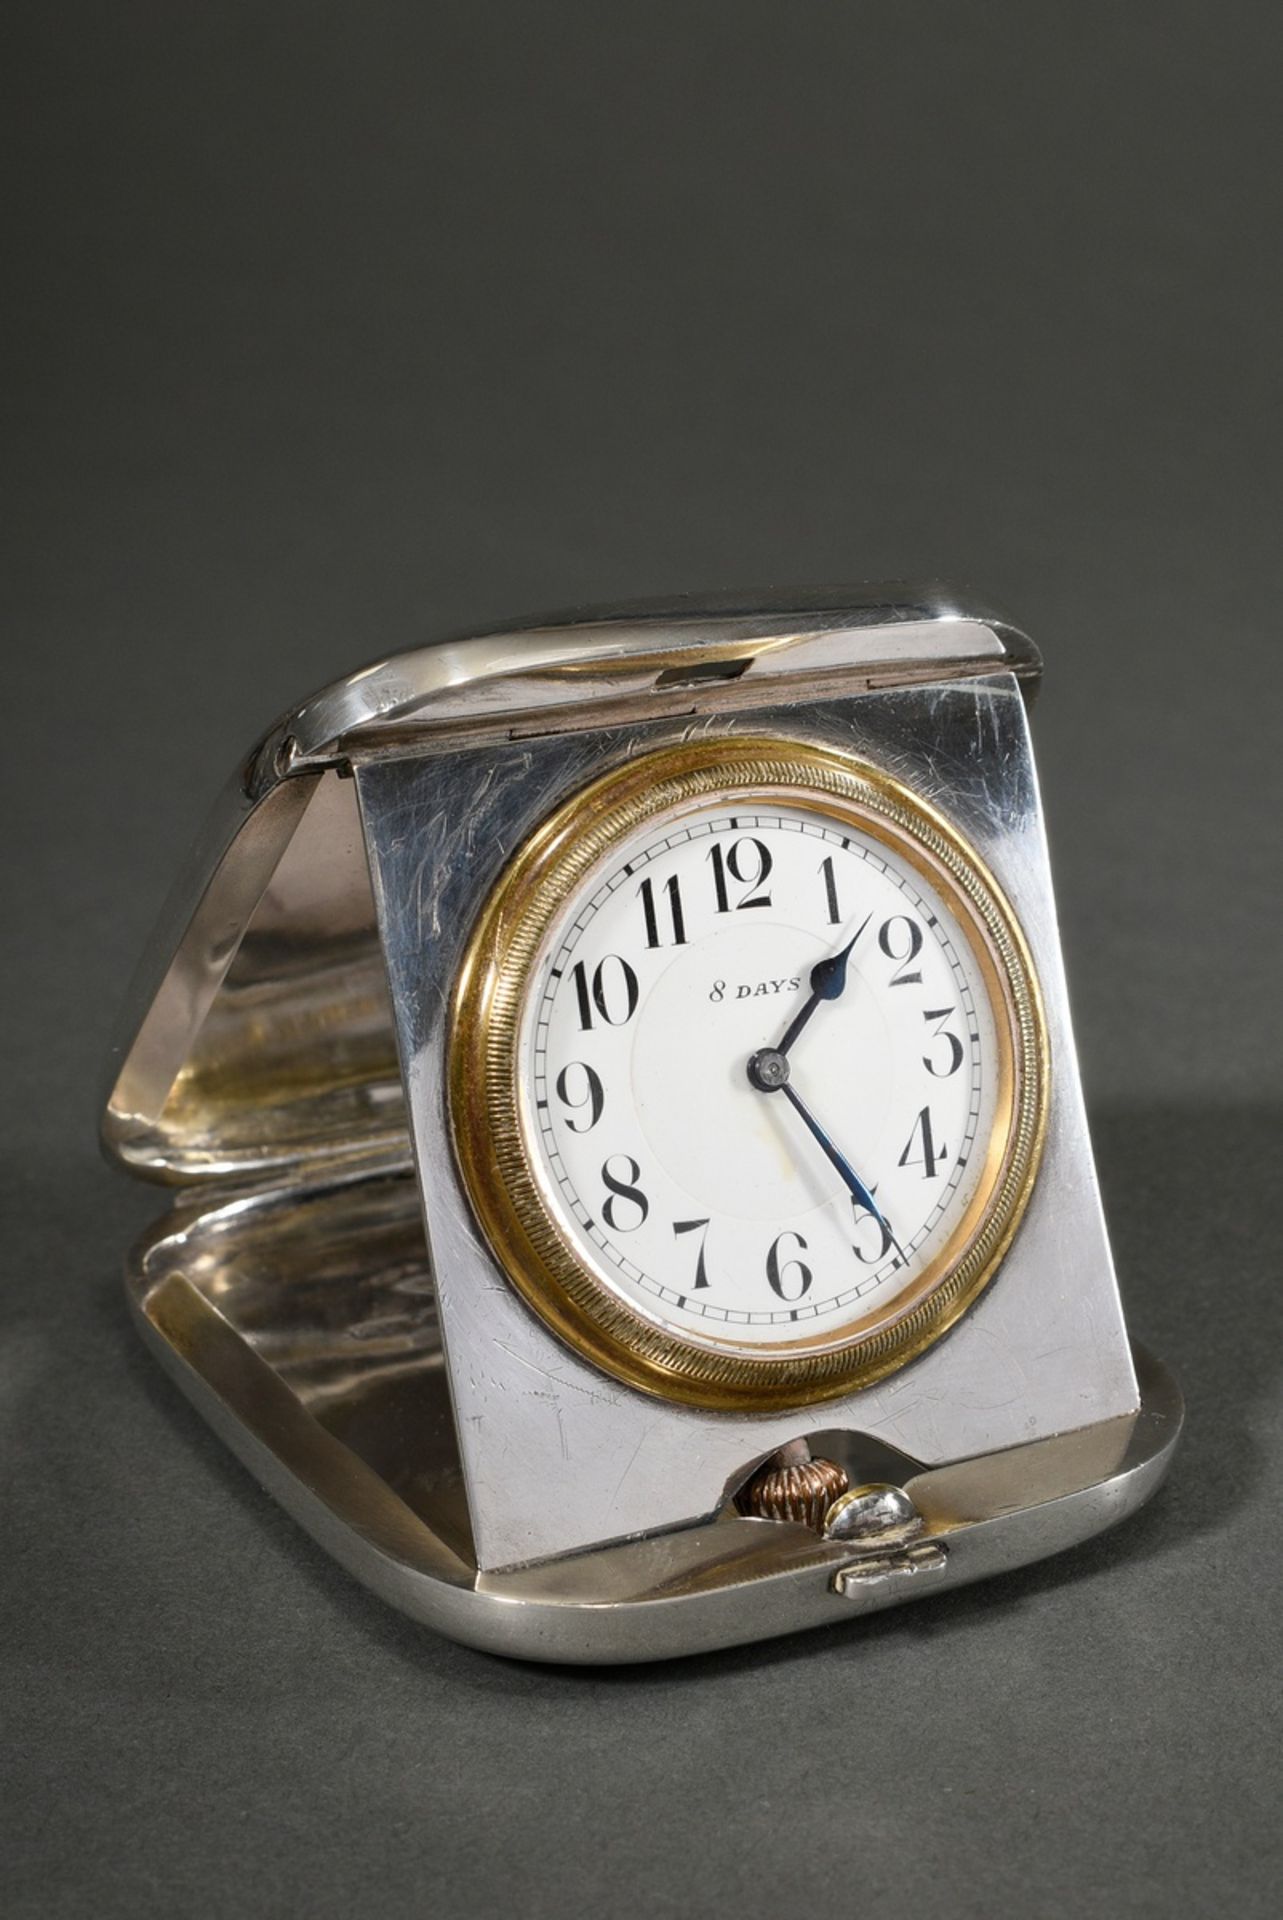 English travelling alarm clock in case, enamel dial with Roman numerals, MZ: E J Clewley & CO, Ches